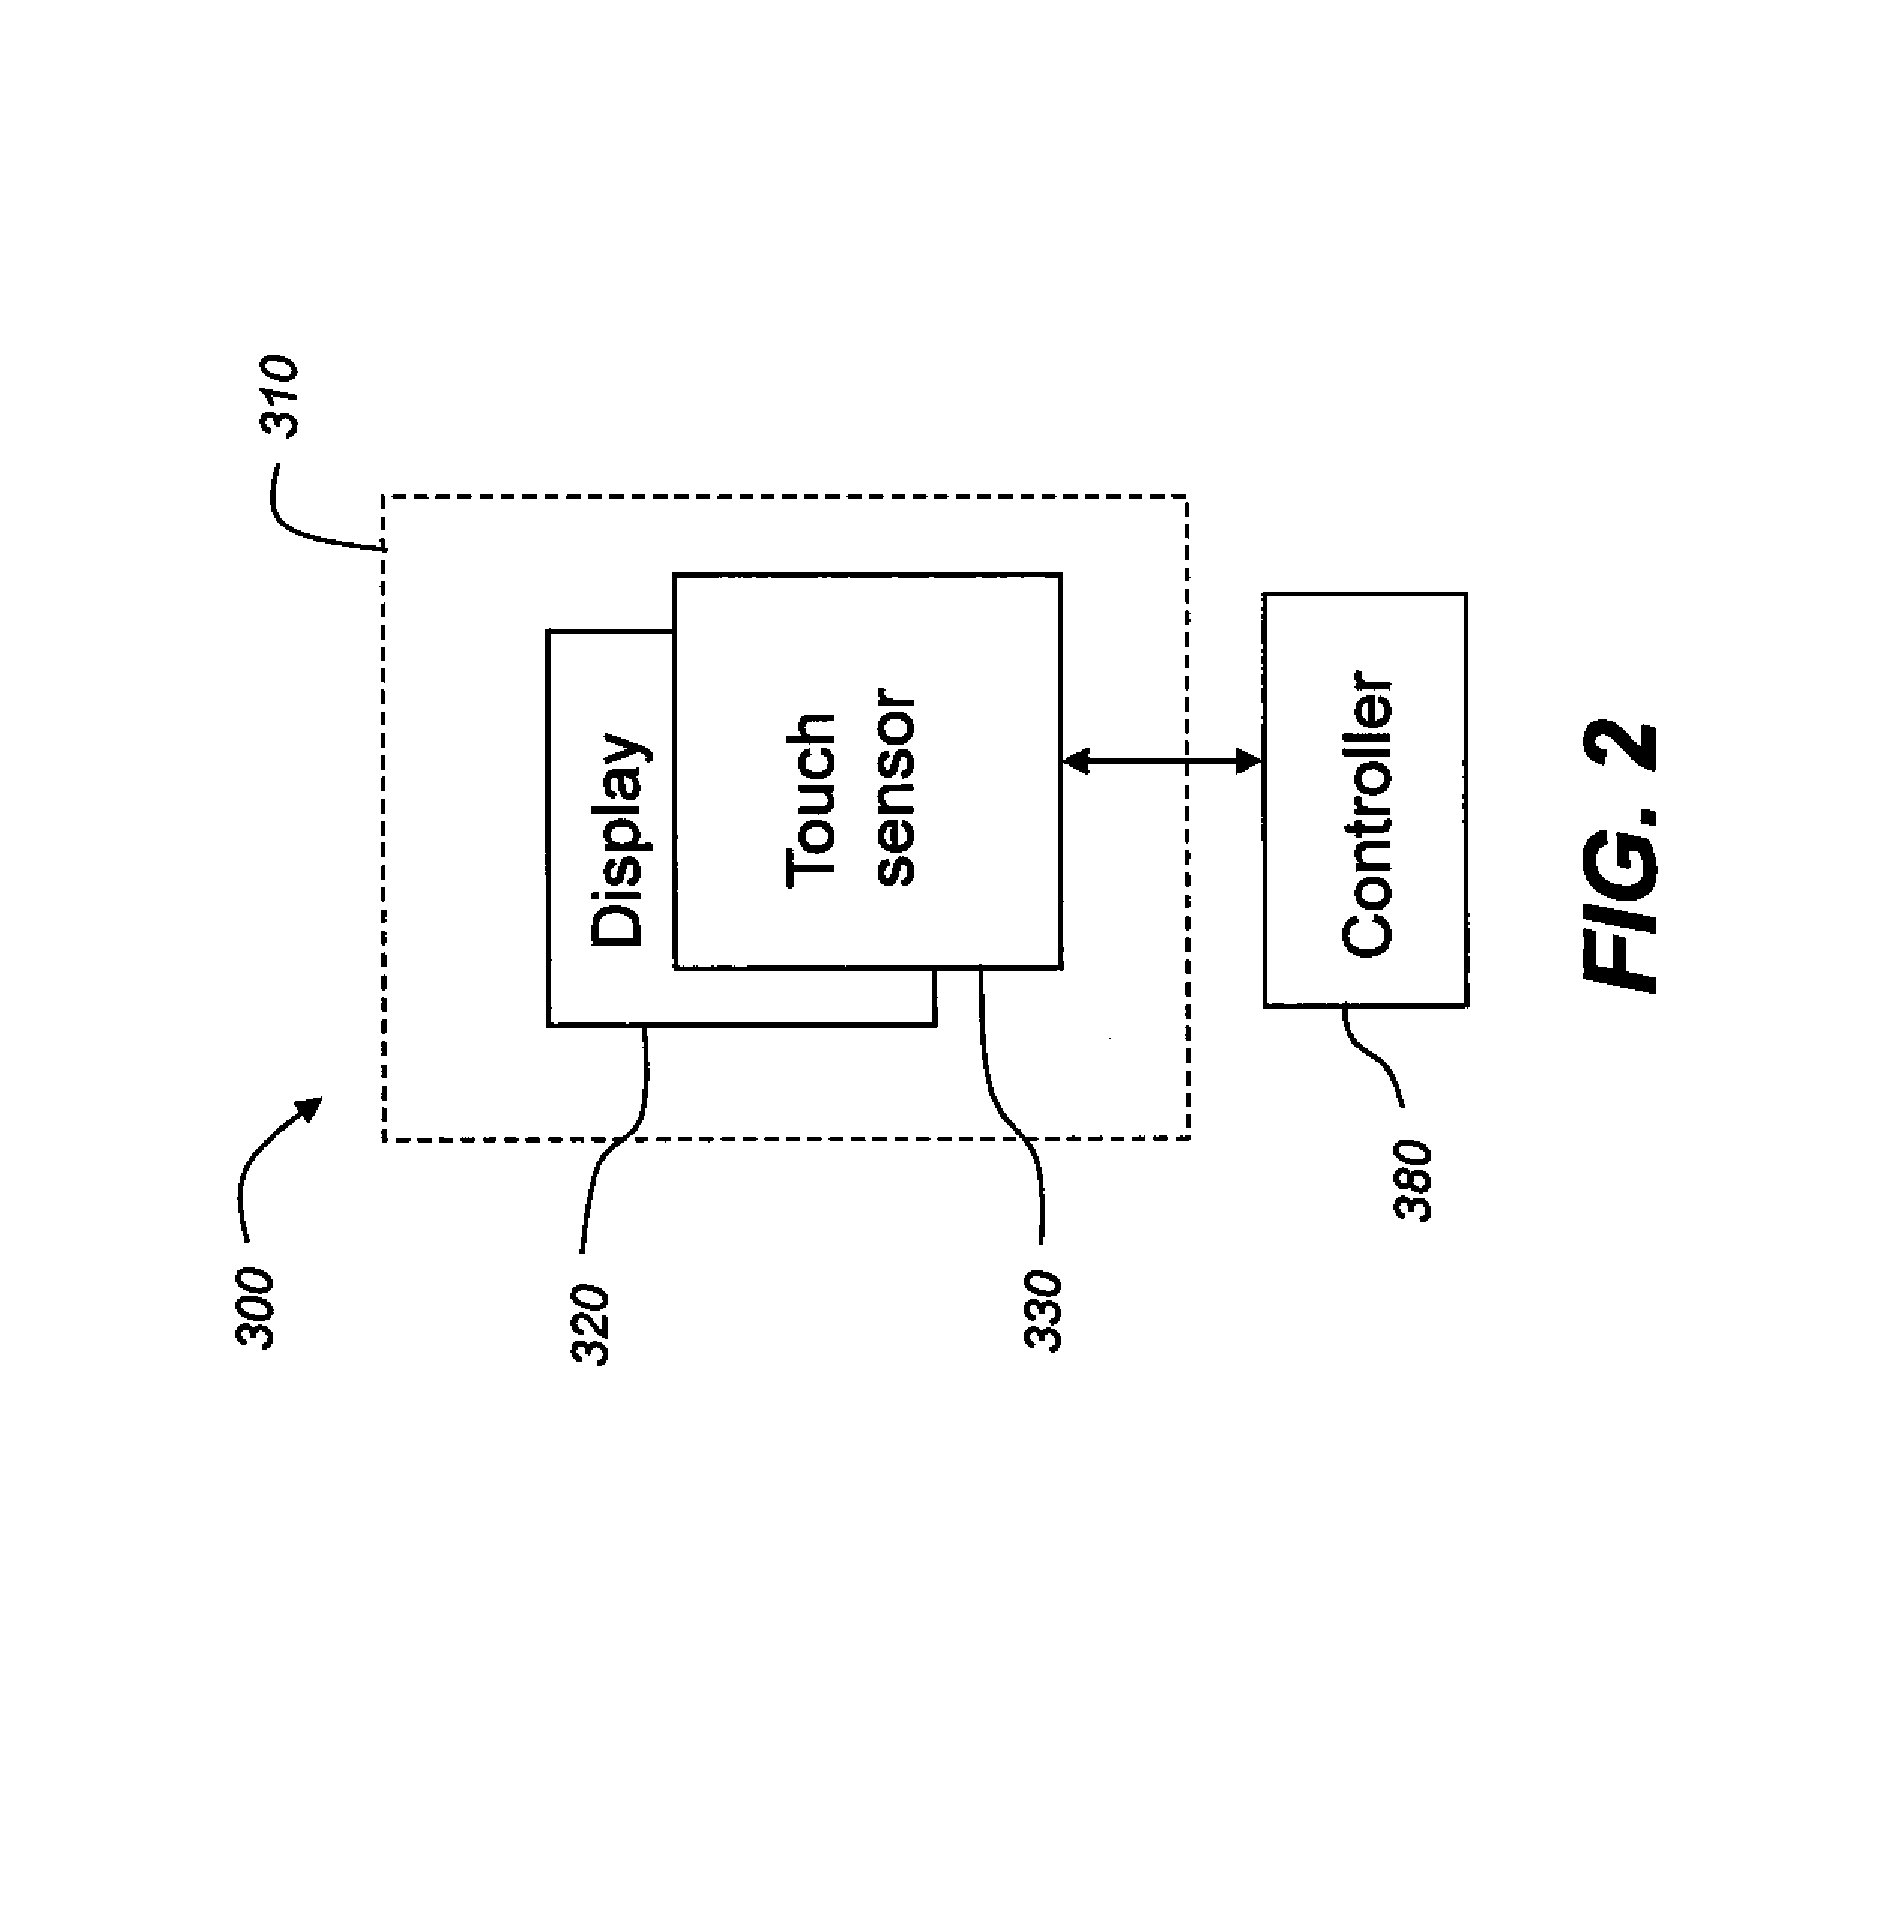 Photopolymerizable compositions for electroless plating methods